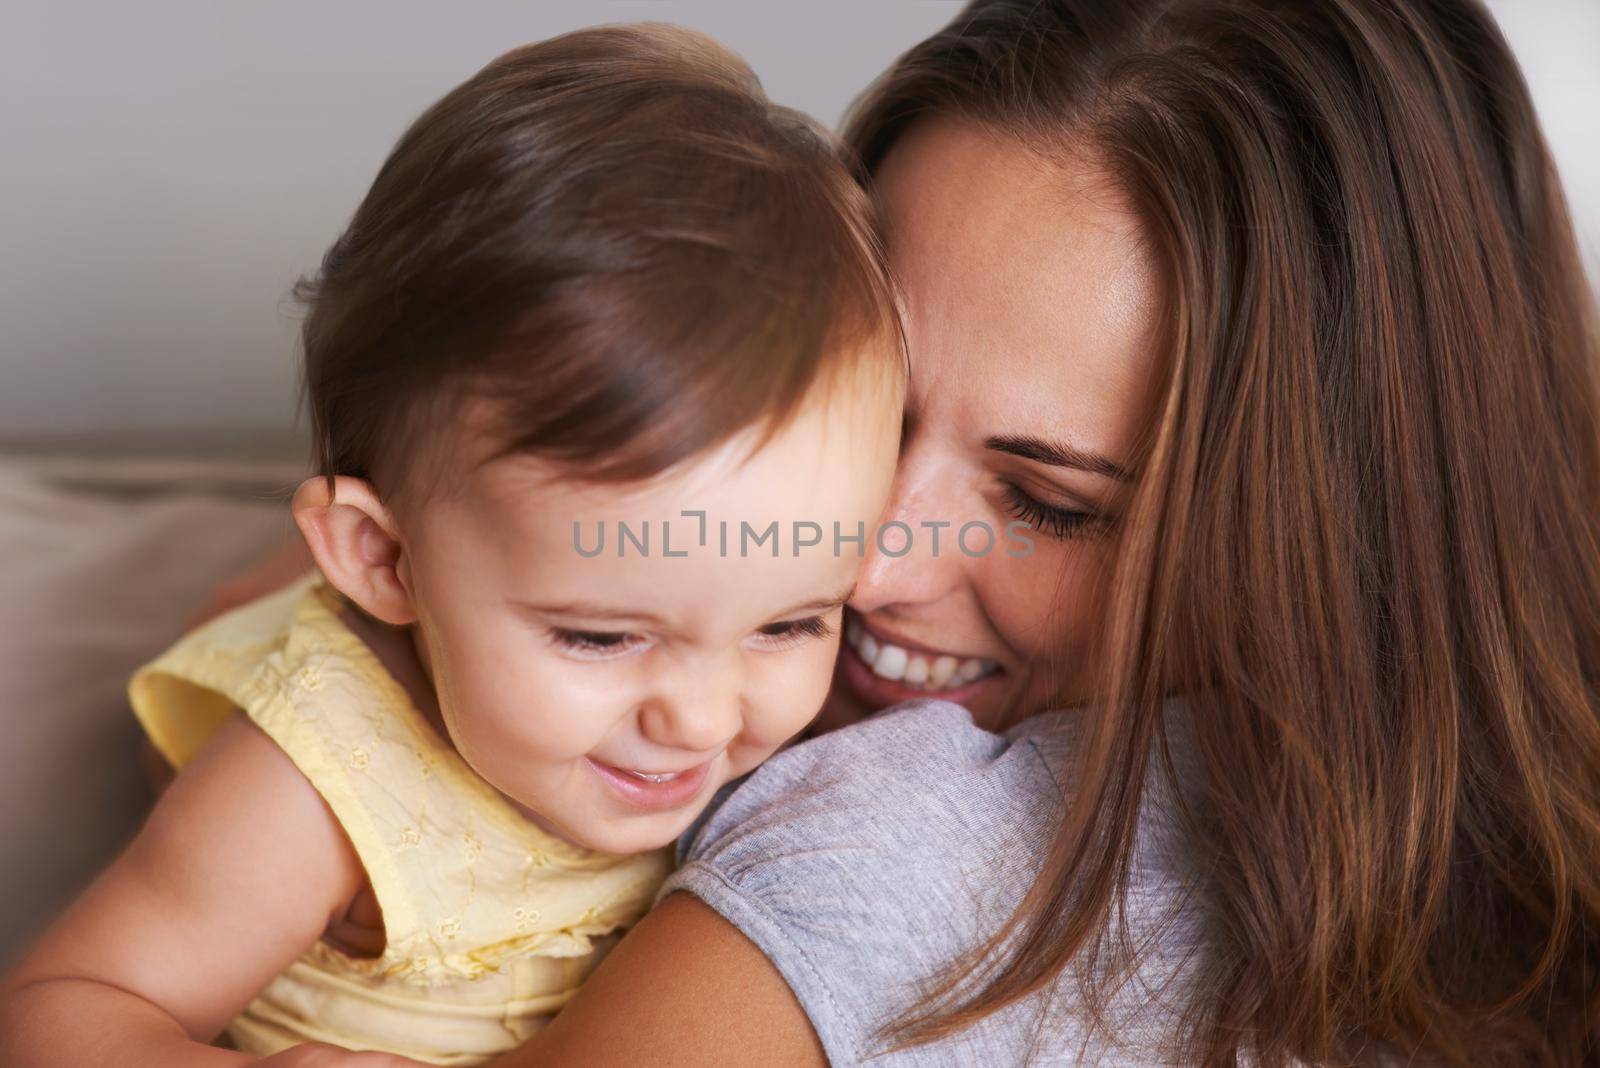 Shot of an adorable little baby and her mother sharing a cute moment.